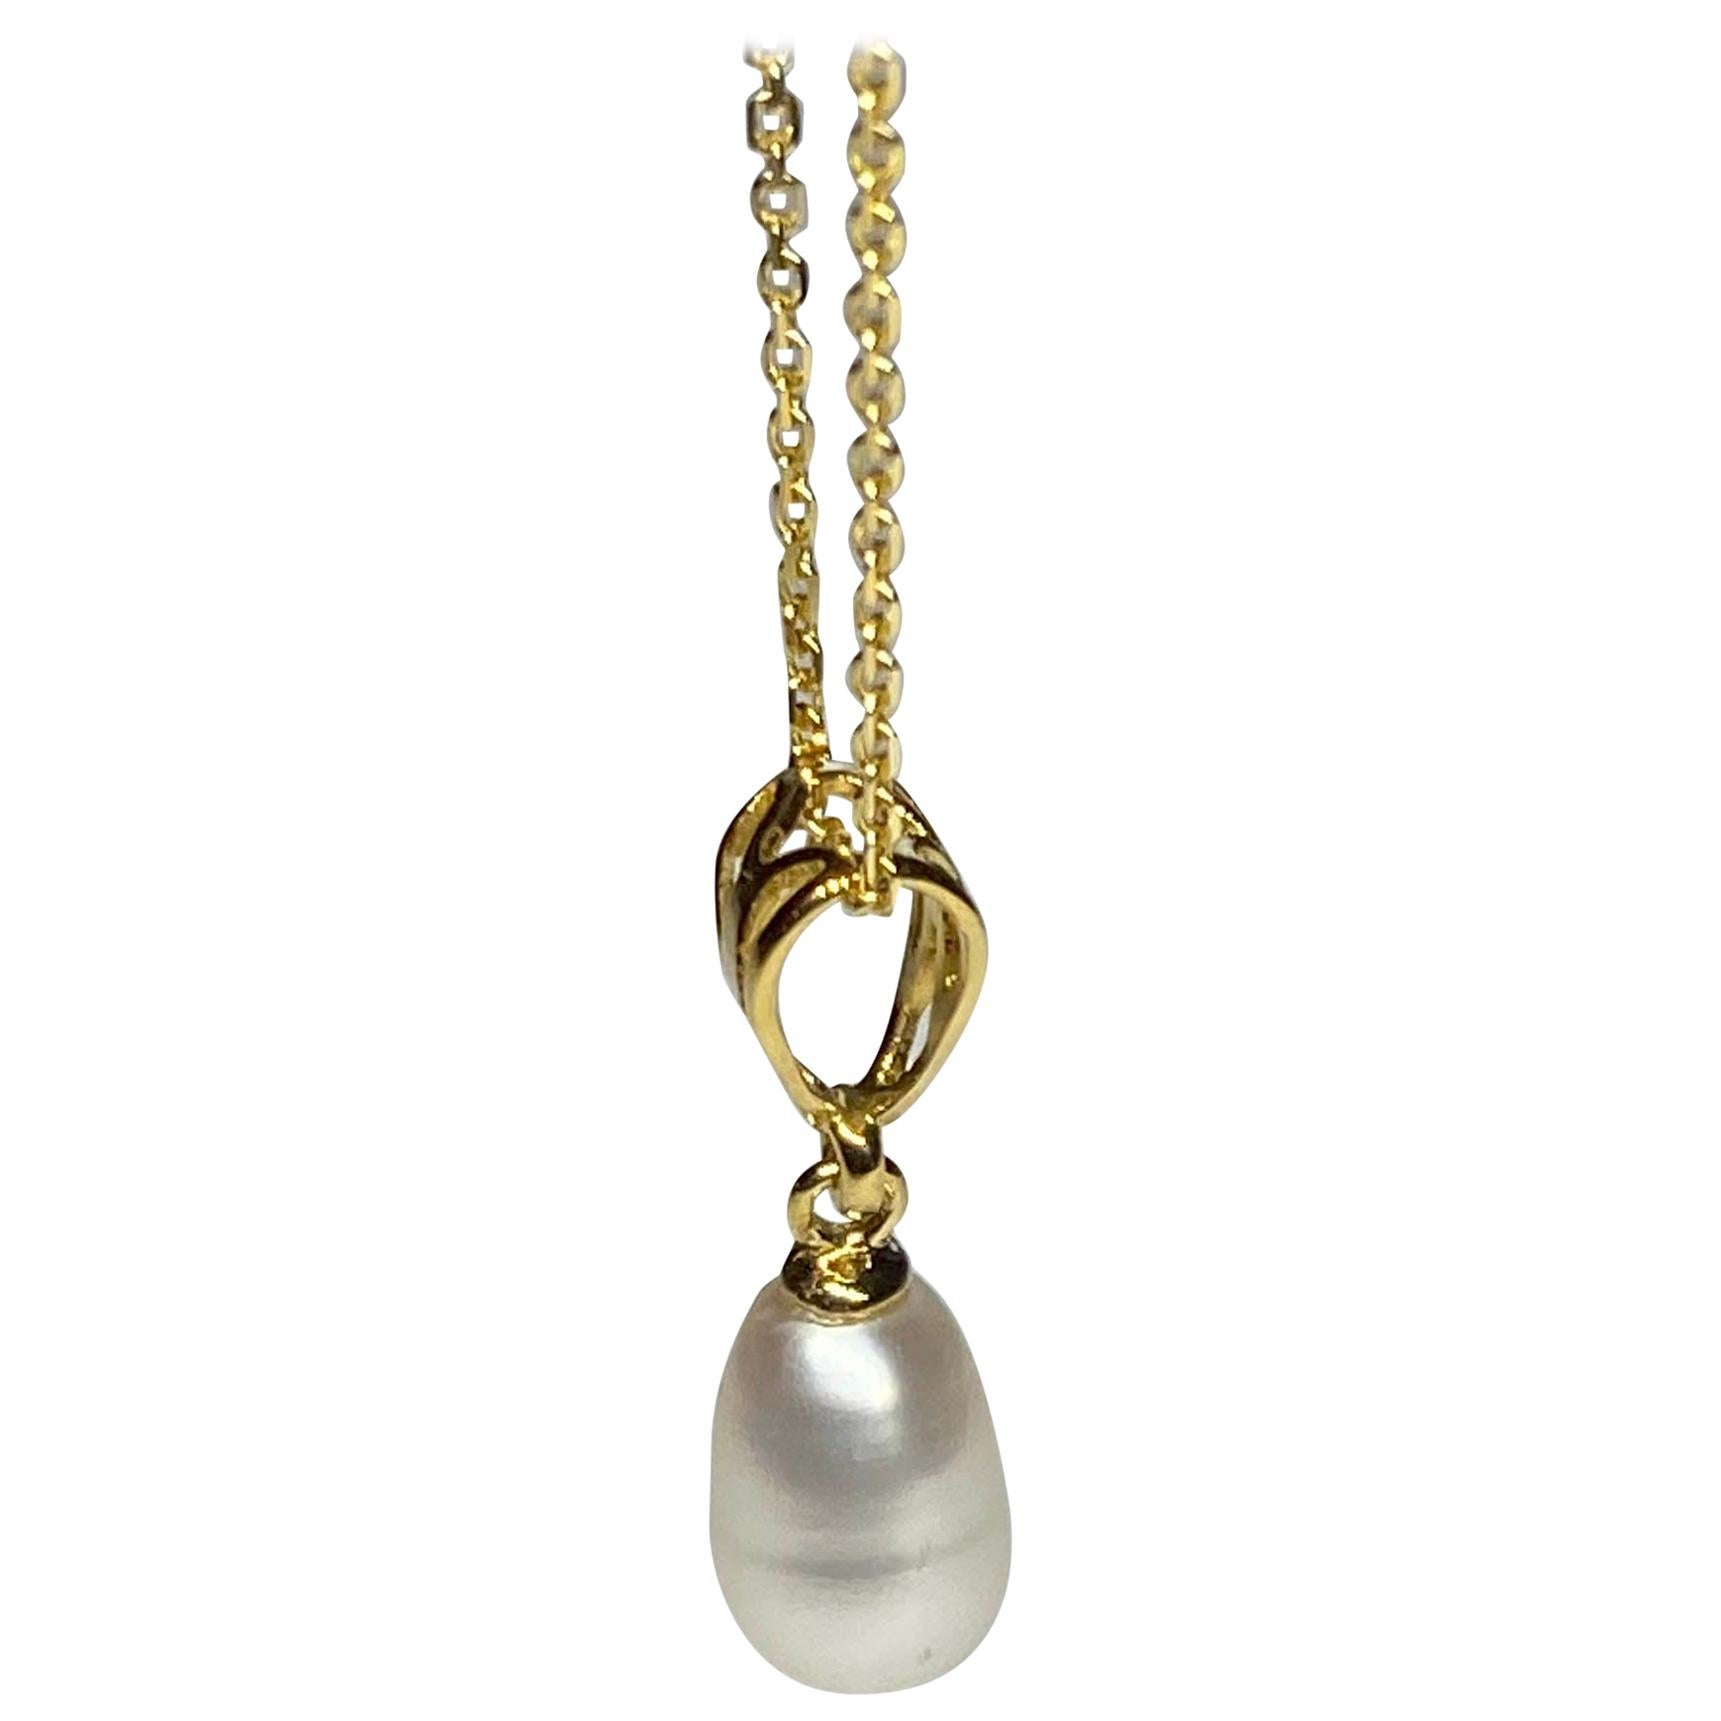 A Gold Plated Silver Pendant with a Freshwater Dangle Pearl